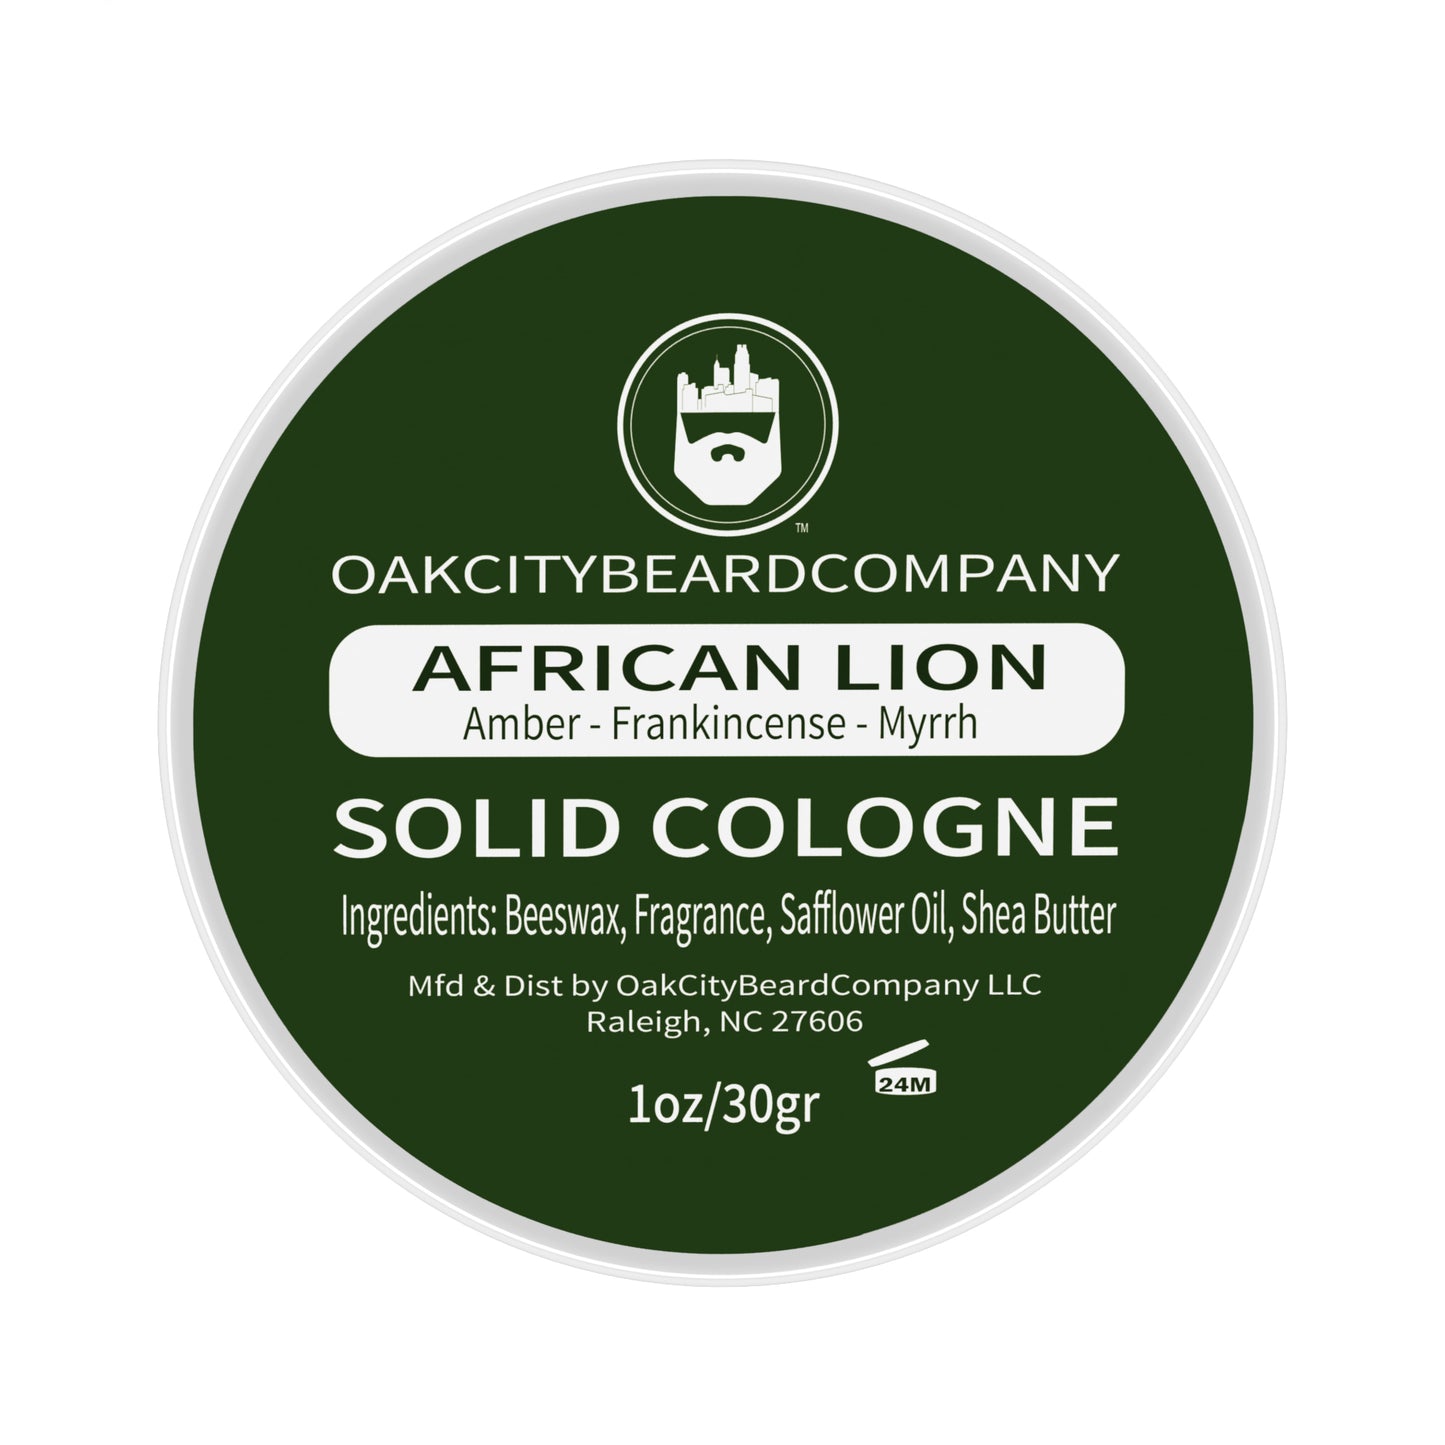 African Lion (Solid Cologne) by Oak City Beard Company